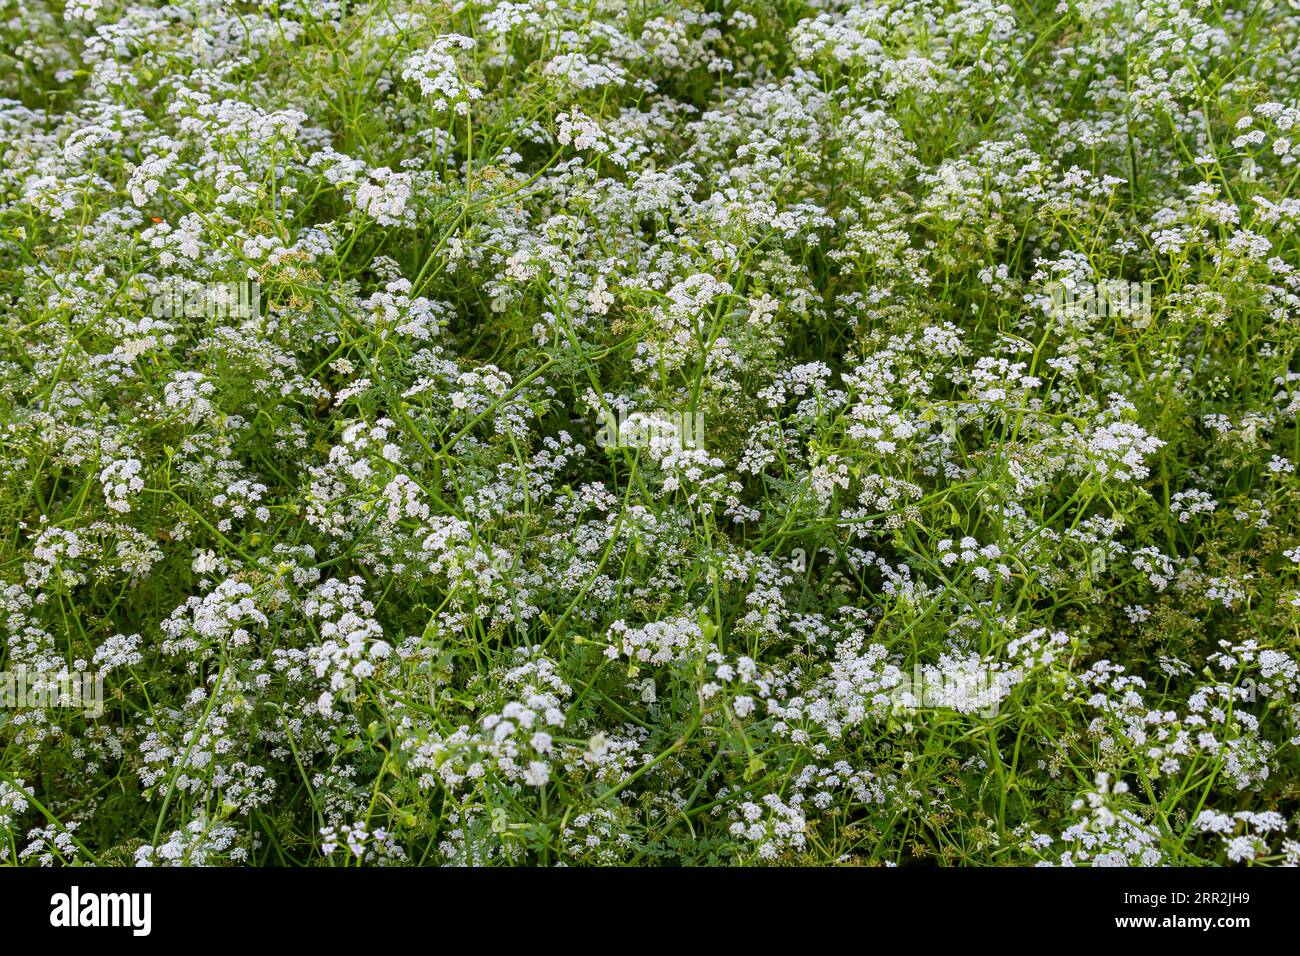 Conium maculatum, colloquially known as hemlock, poison hemlock or wild hemlock, is a highly poisonous biennial herbaceous flowering plant in the carr Stock Photo